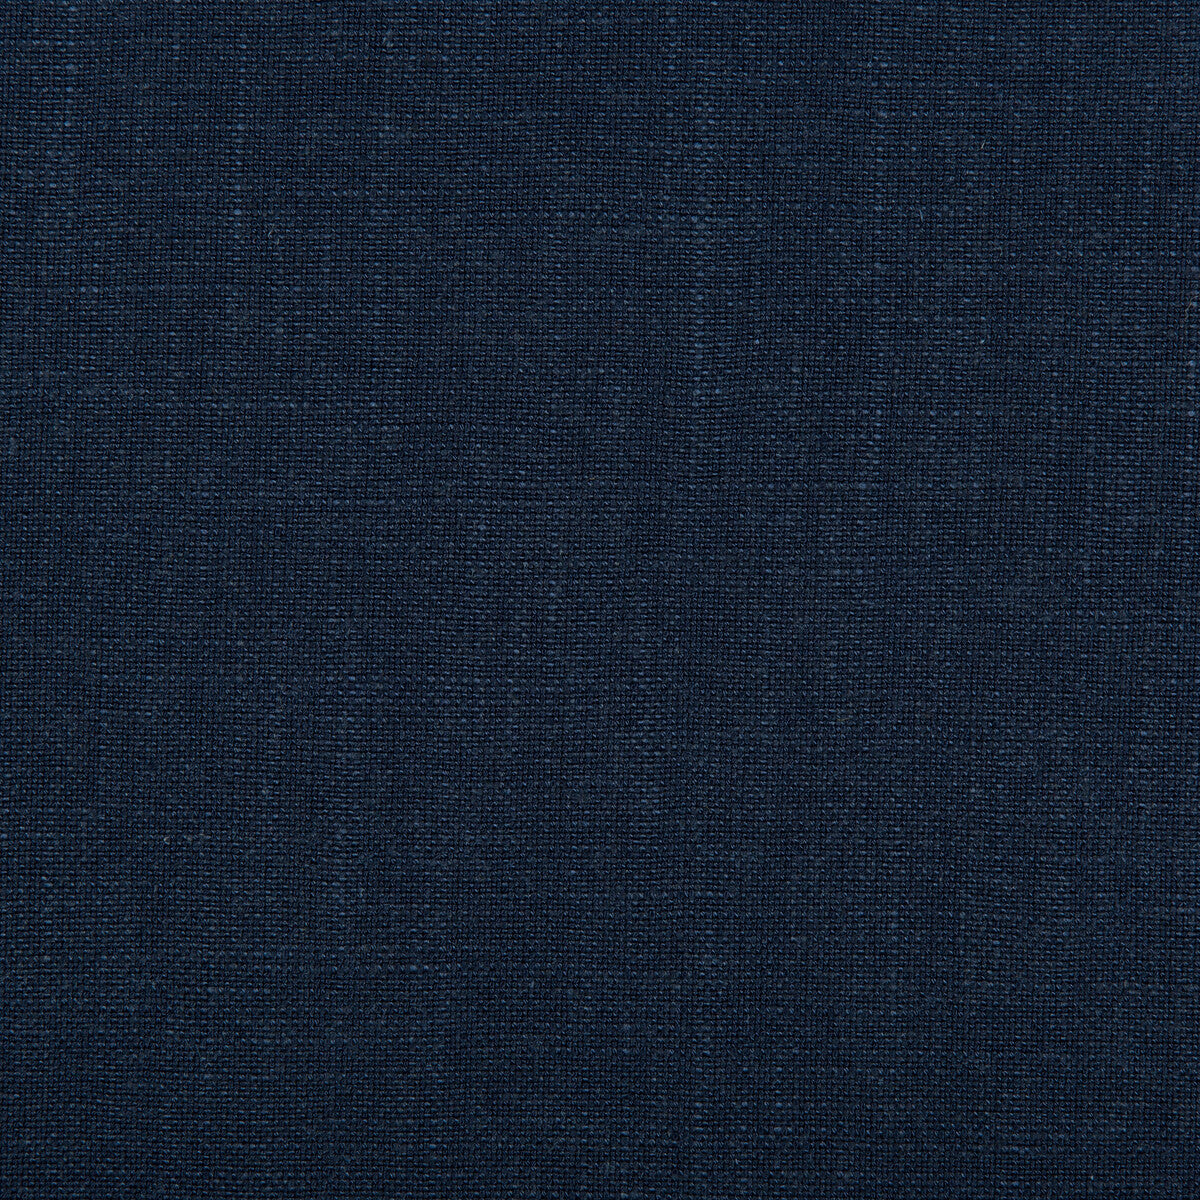 Aura fabric in navy color - pattern 35520.58.0 - by Kravet Design